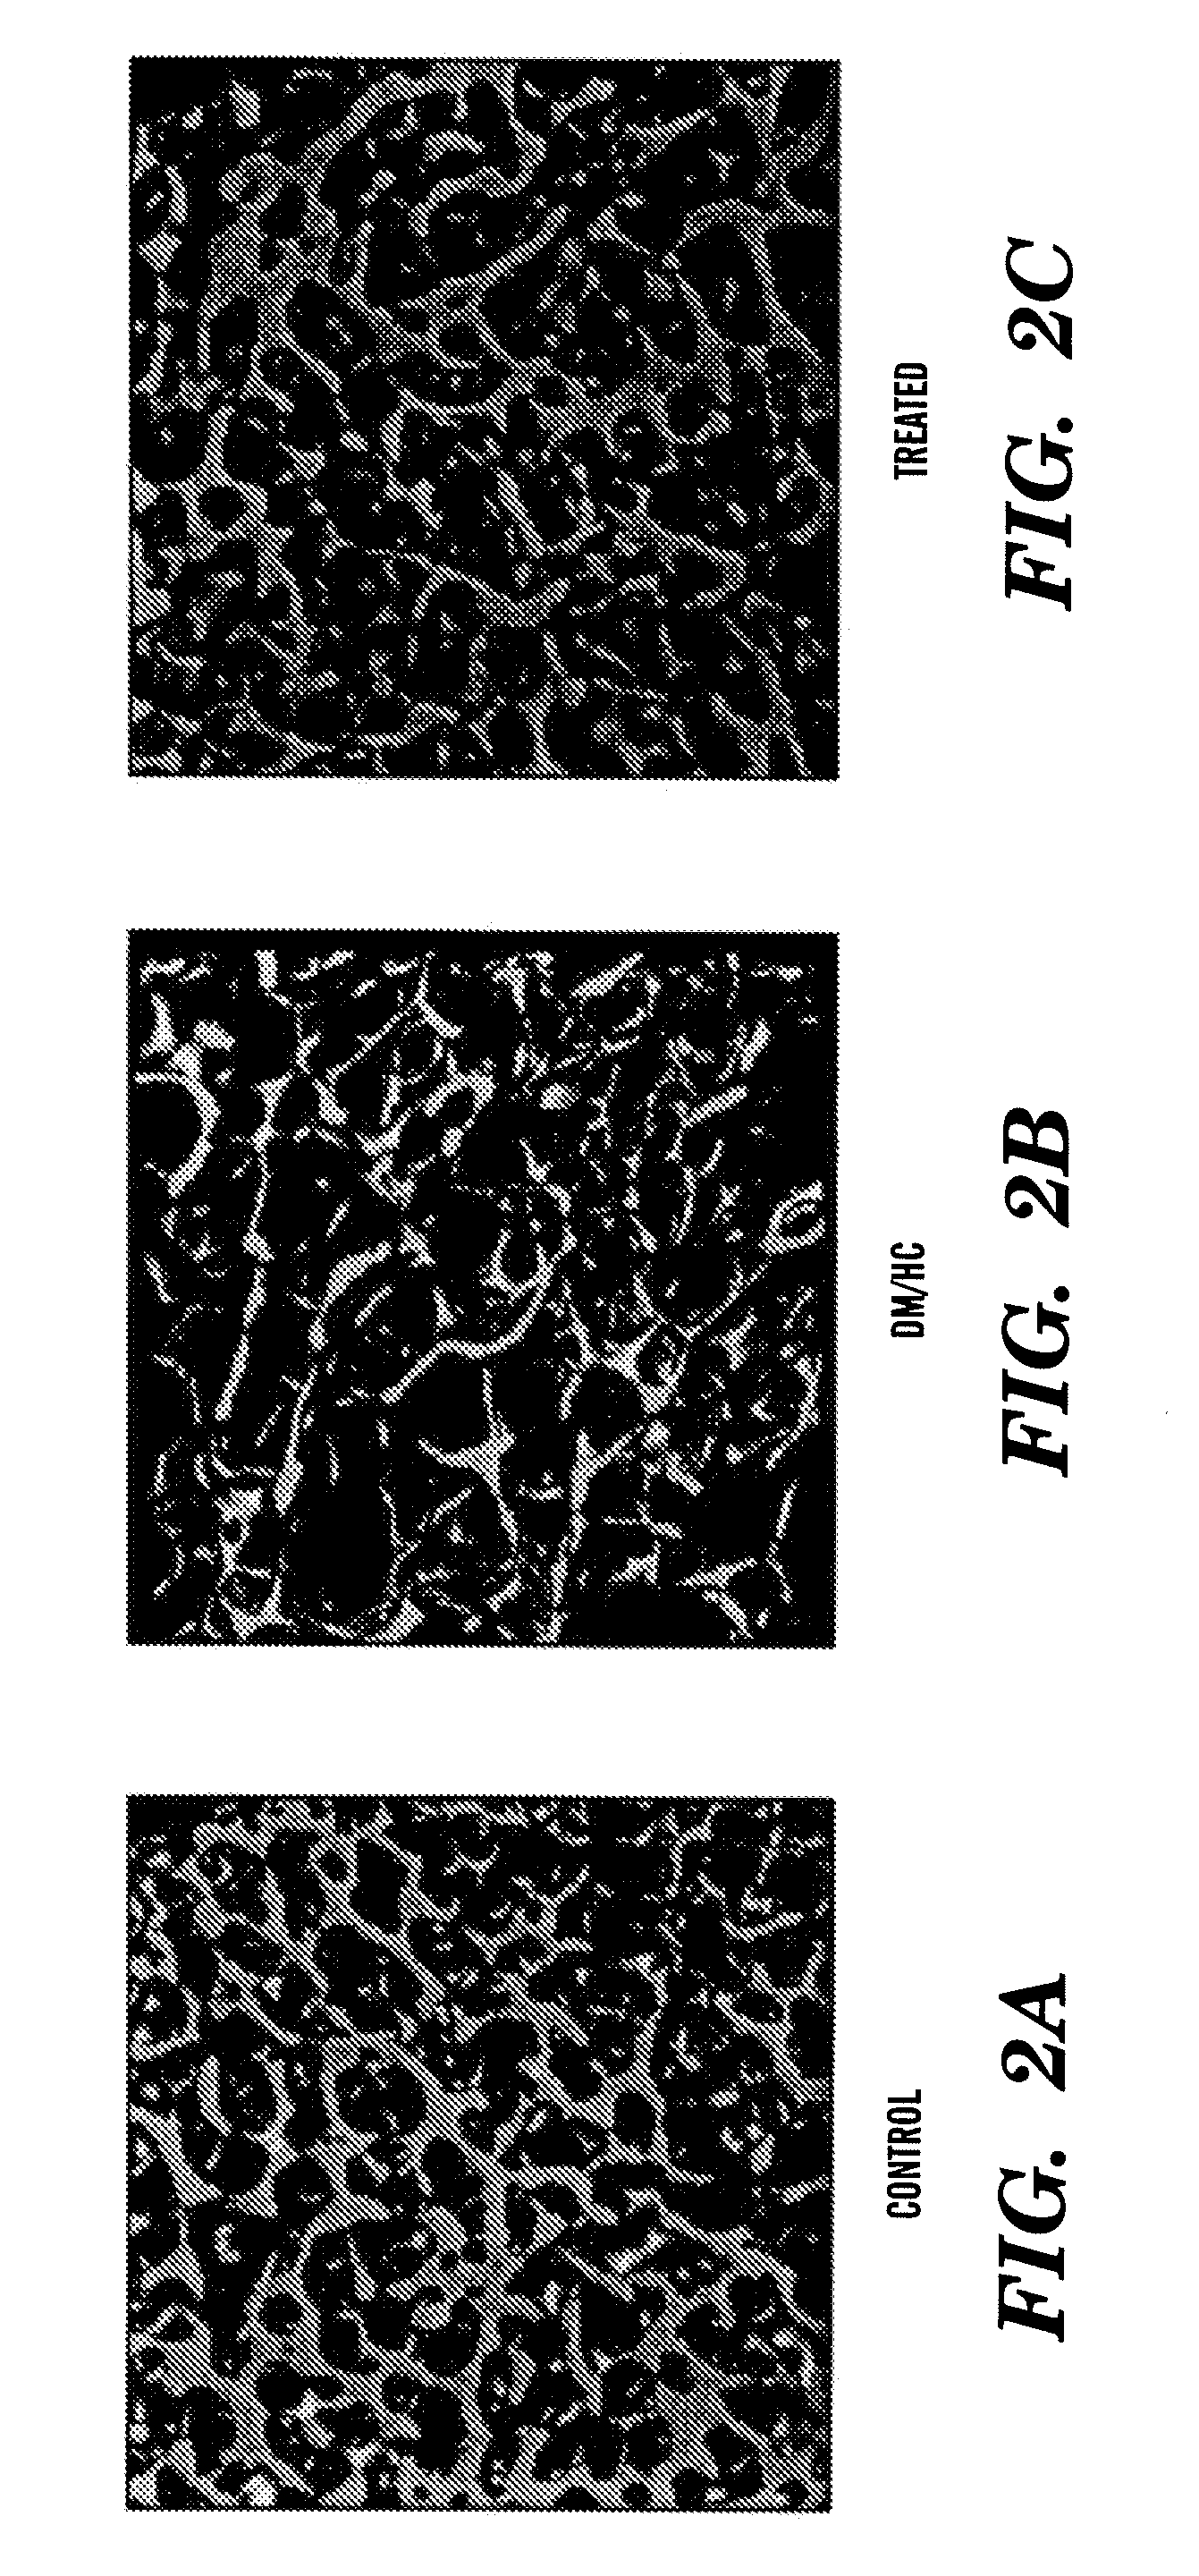 Methods of treatment and prevention of metabolic bone diseases and disorders